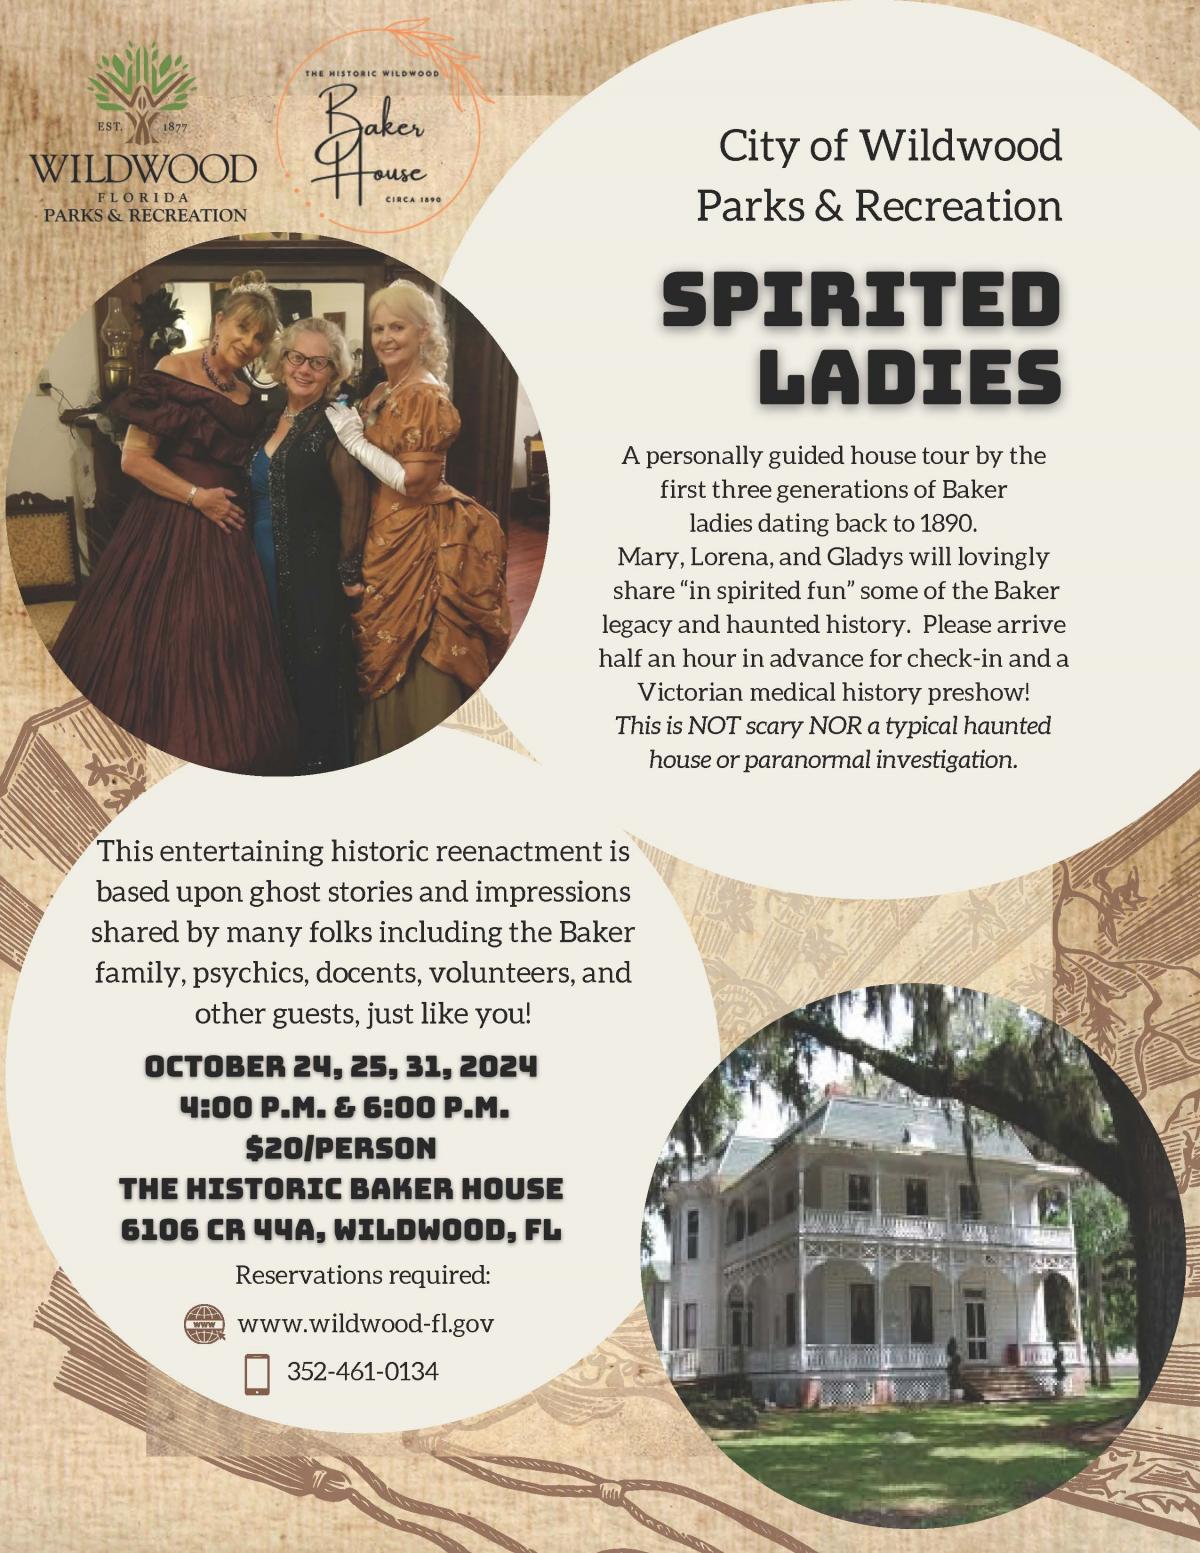 Spirited Ladies Tour, October 24-25 & 31, 2024, Baker House, 6106 CR 44 A, Wildwood, Fl 34785, 4:00 p.m. and 6:00 p.m.